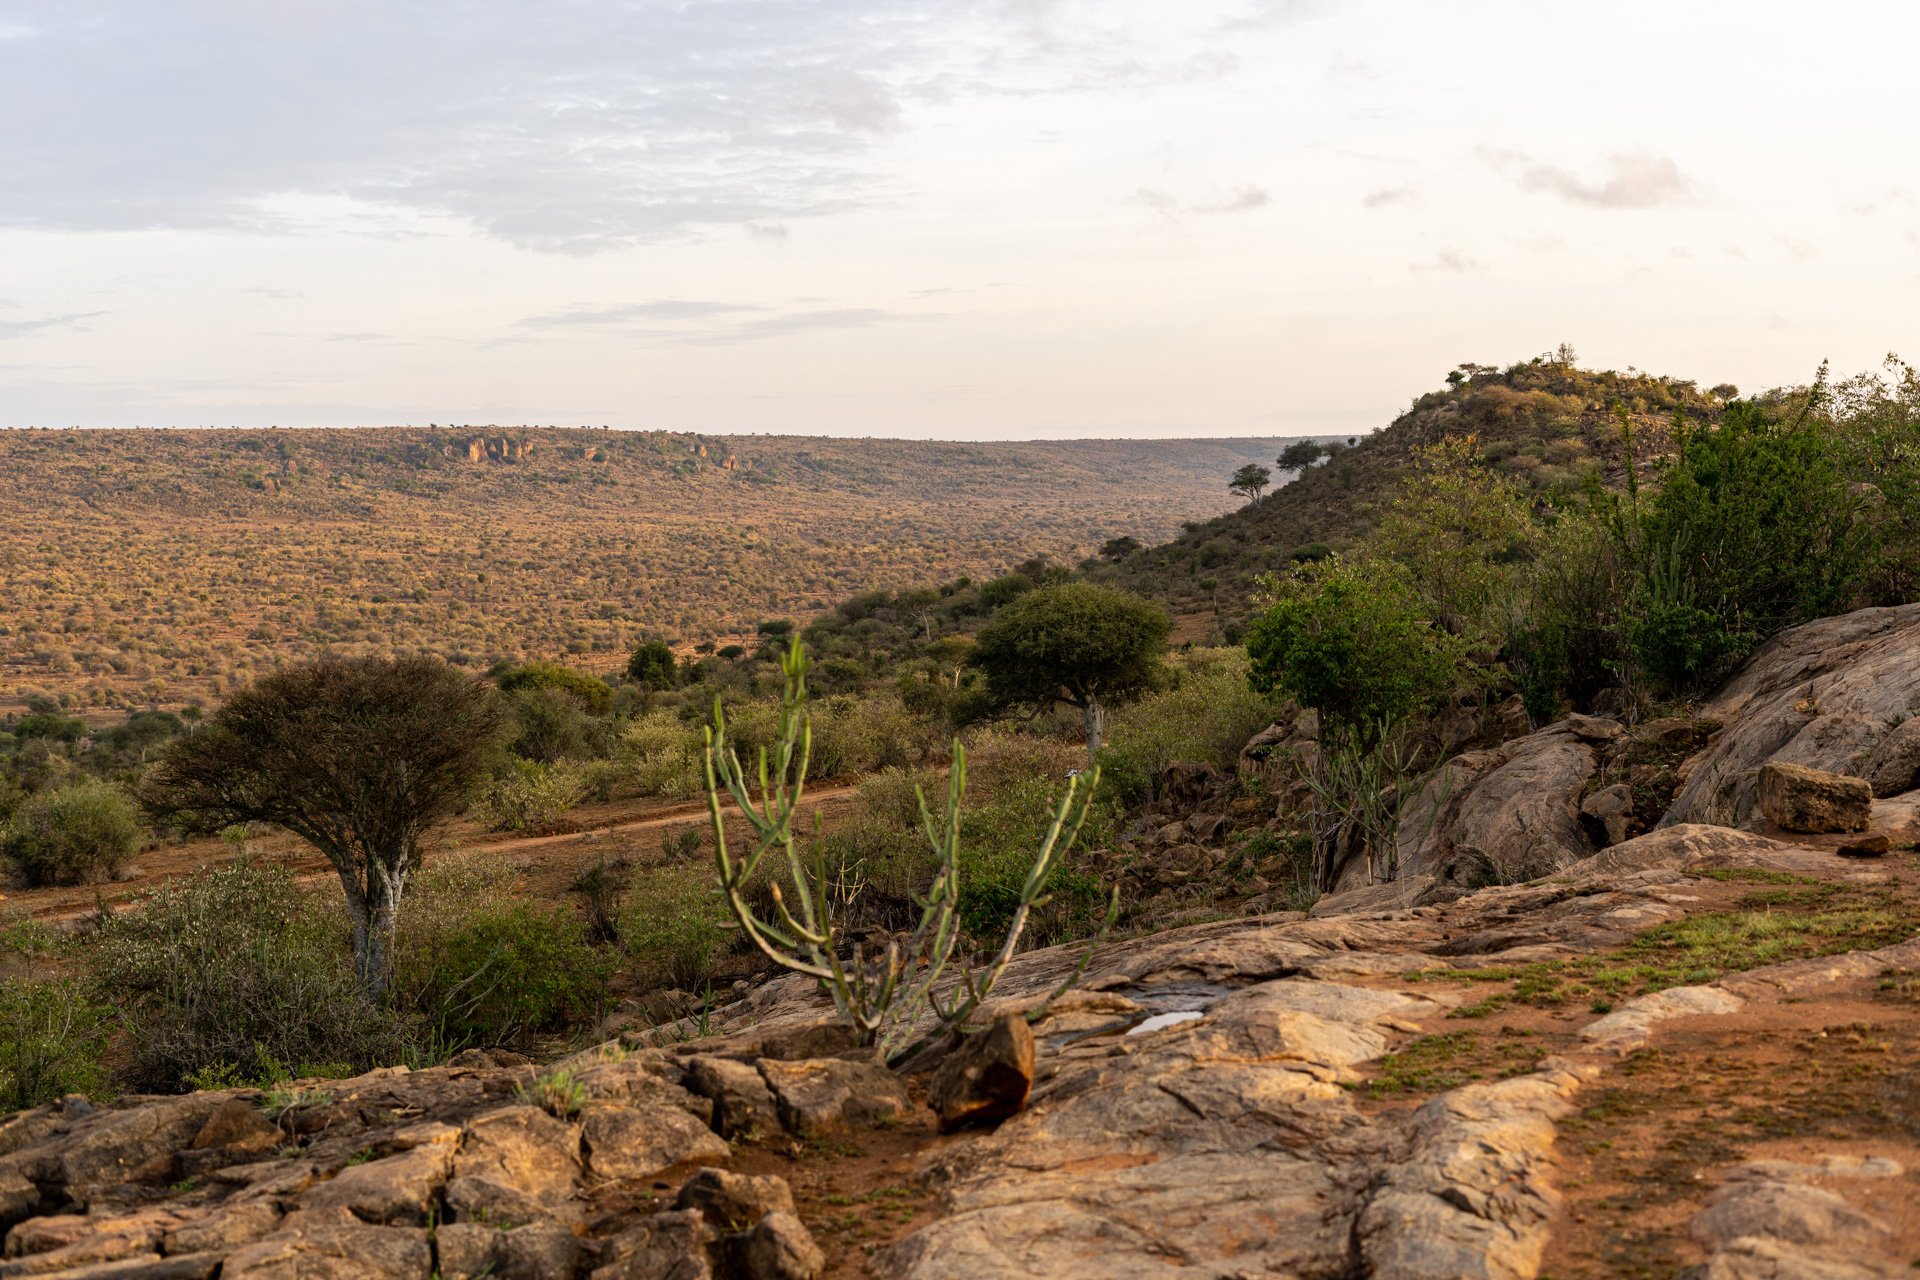 The rocky hills of Laikipia, the setting for this story